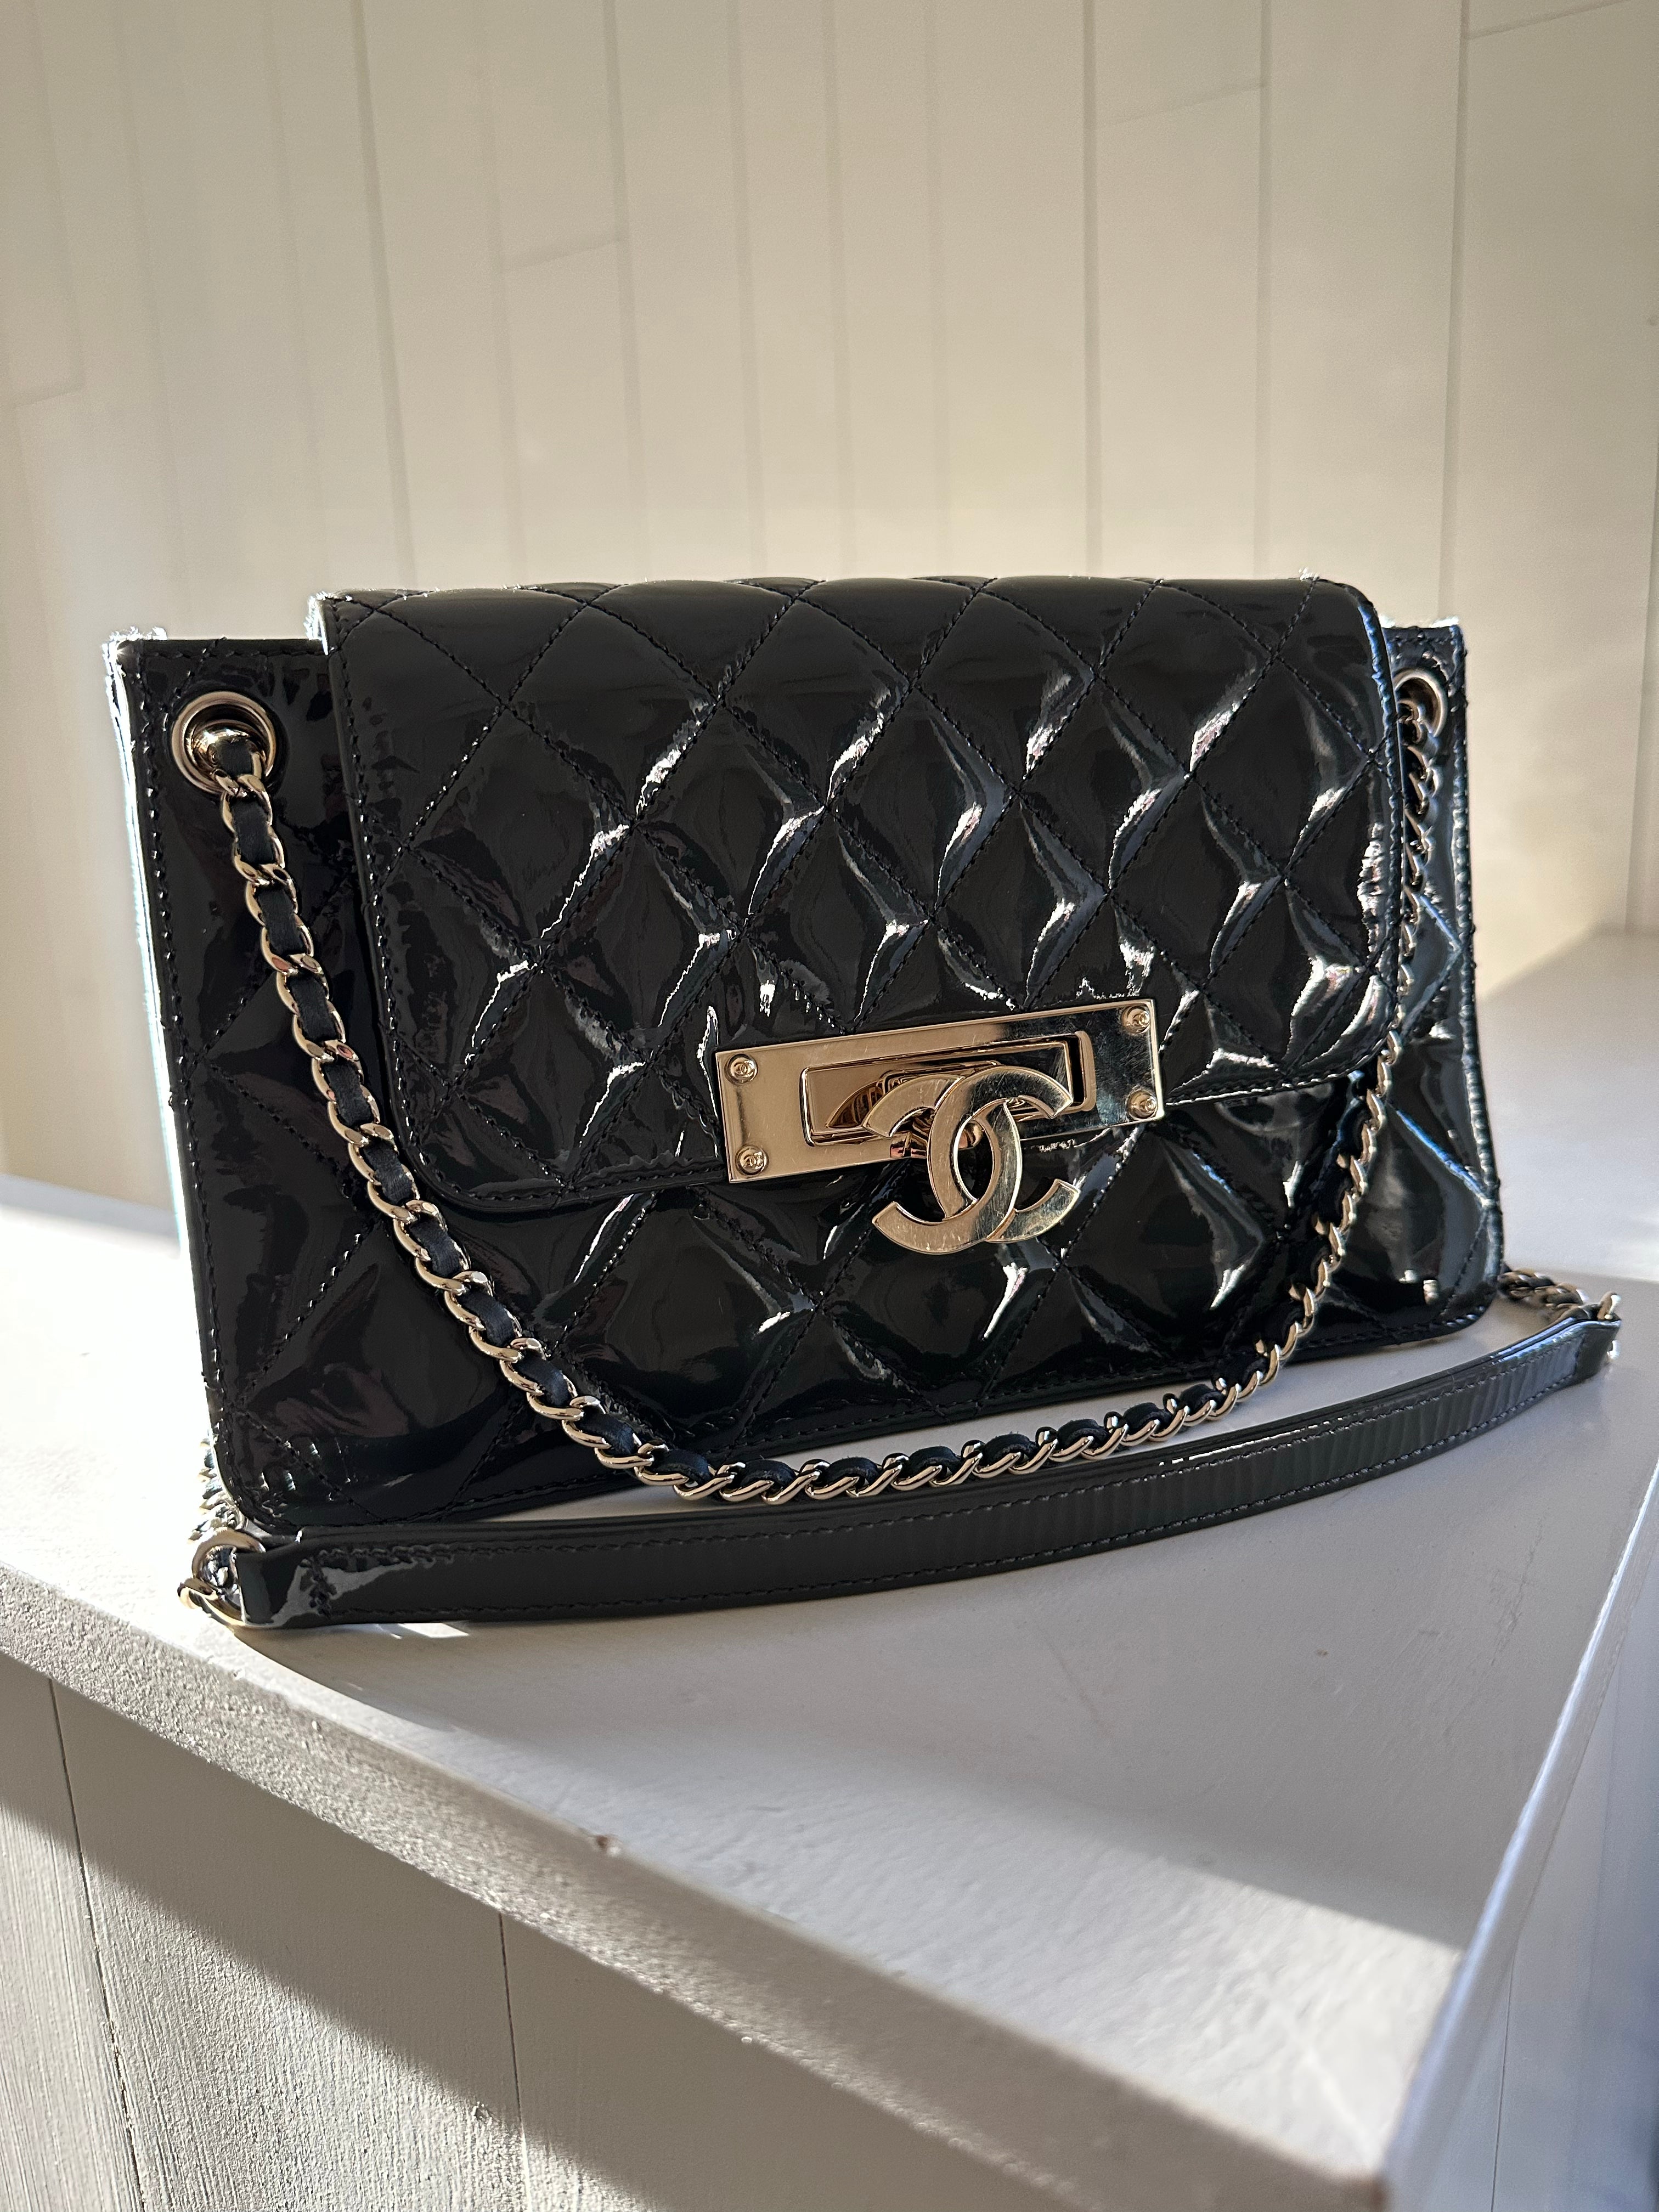 Chanel Black Quilted Patent Leather Reissue Accordion Flap Bag